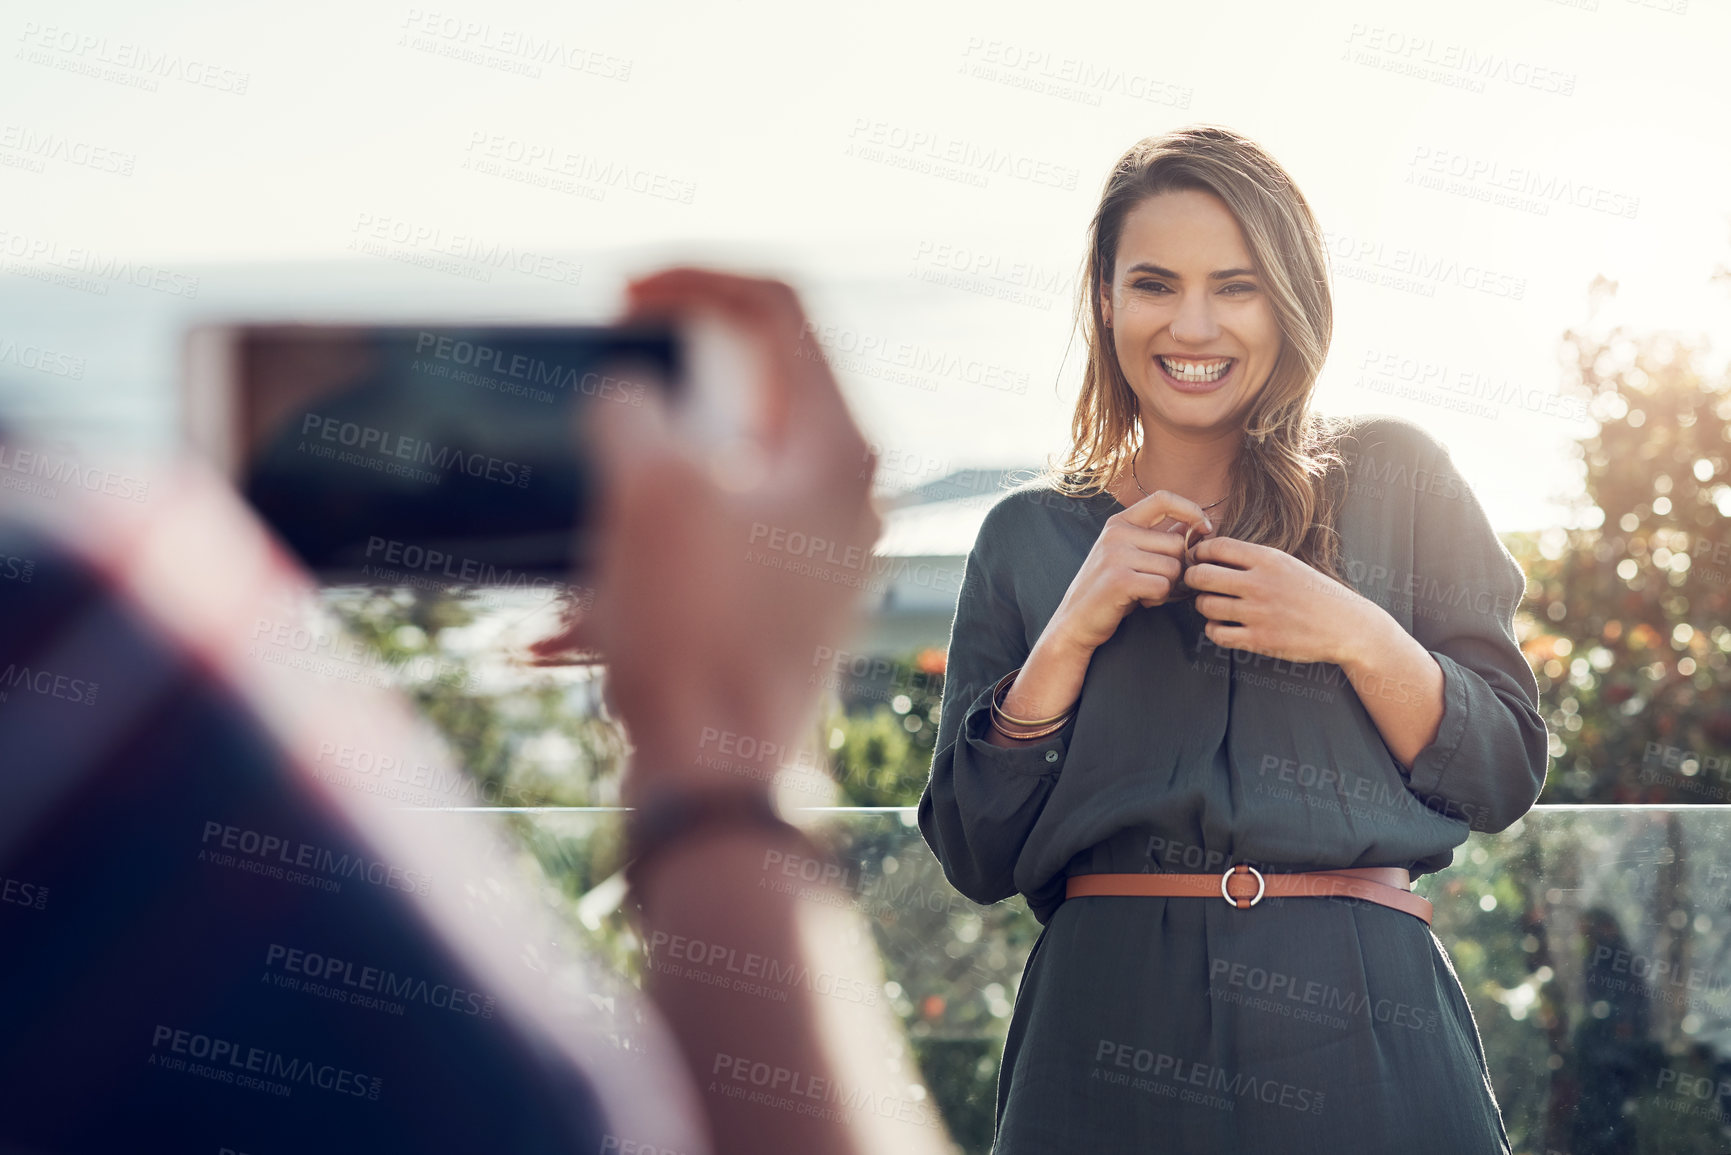 Buy stock photo Shot of an attractive young woman laughing while her boyfriend takes pictures of her outdoor